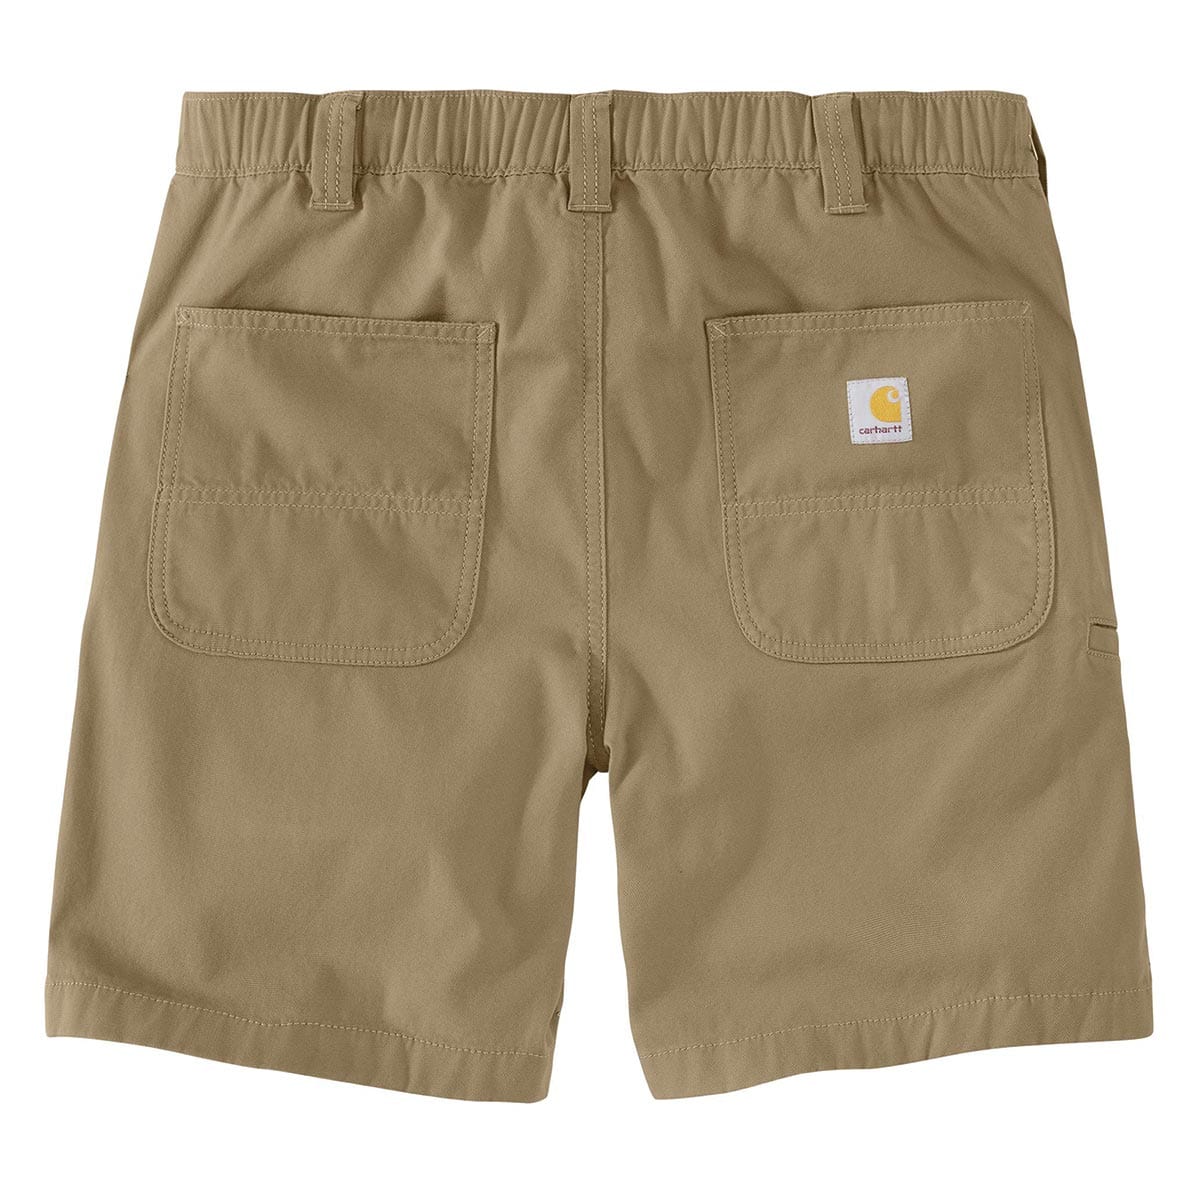 Carhartt Rugged Flex Relaxed Fit 8" Canvas Shorts